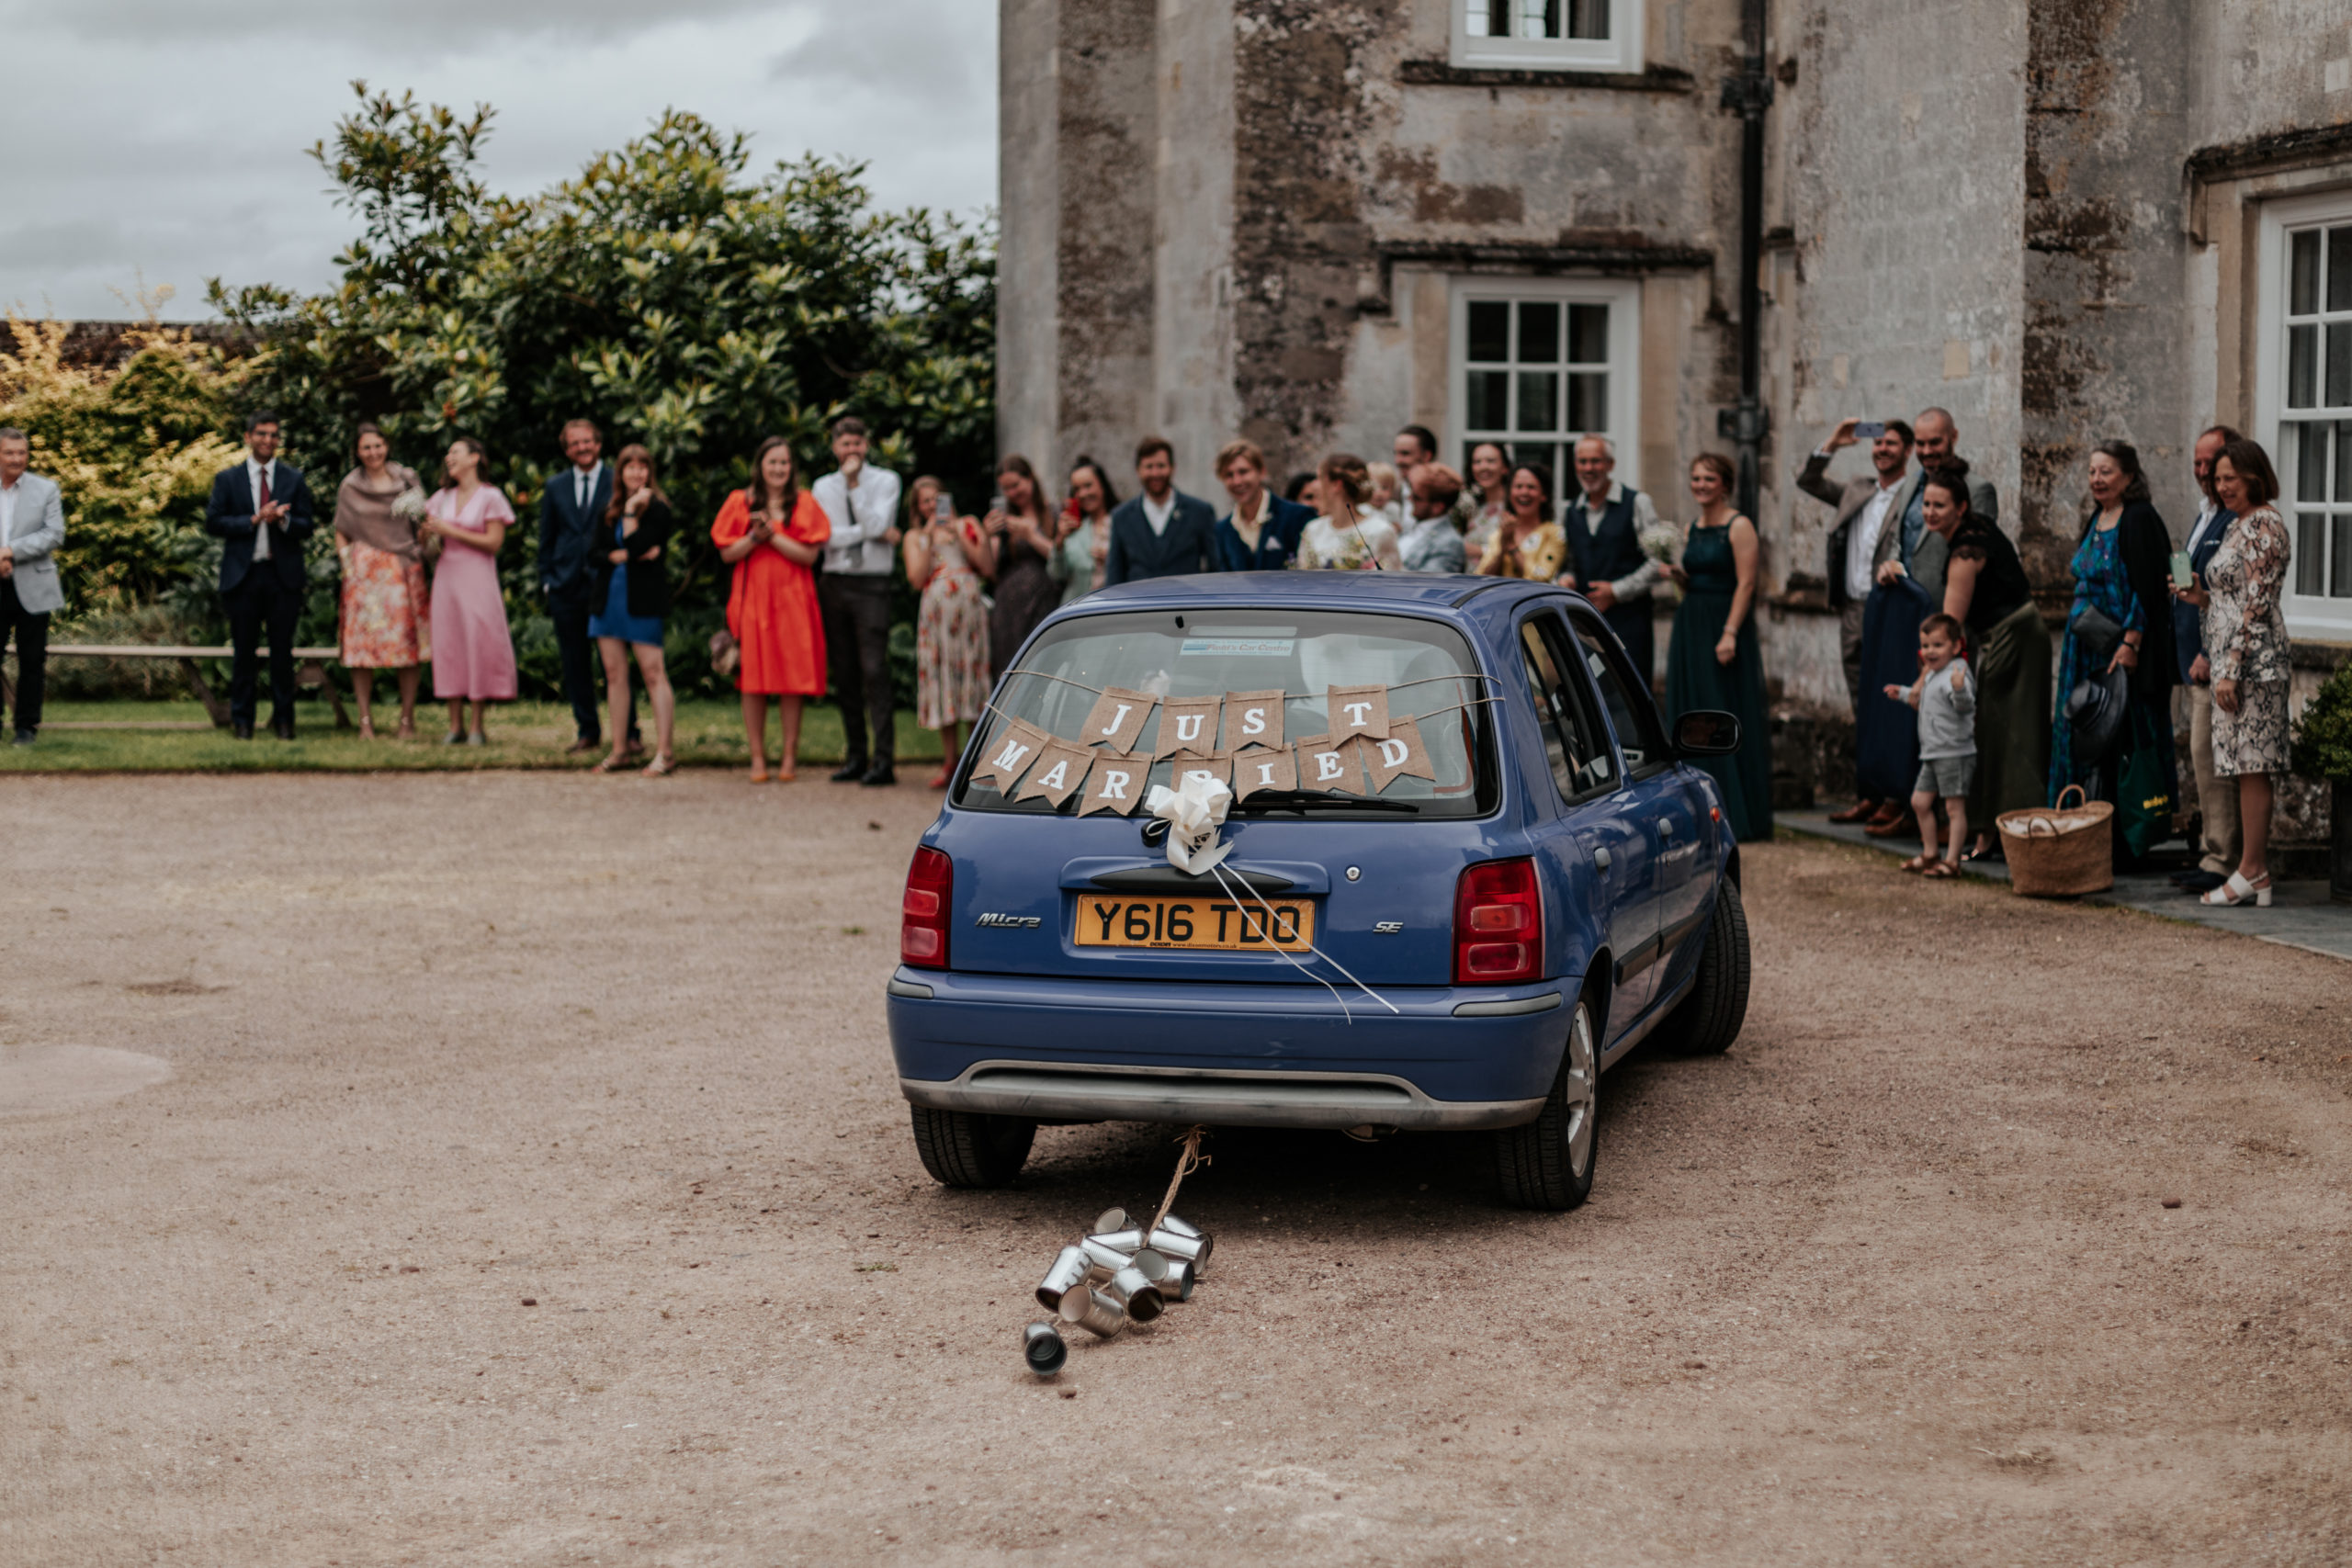 Sarah &amp; Cam&#039;s old Nissan Micra pick them up to take them to their festival wedding reception, with cans tied to the back